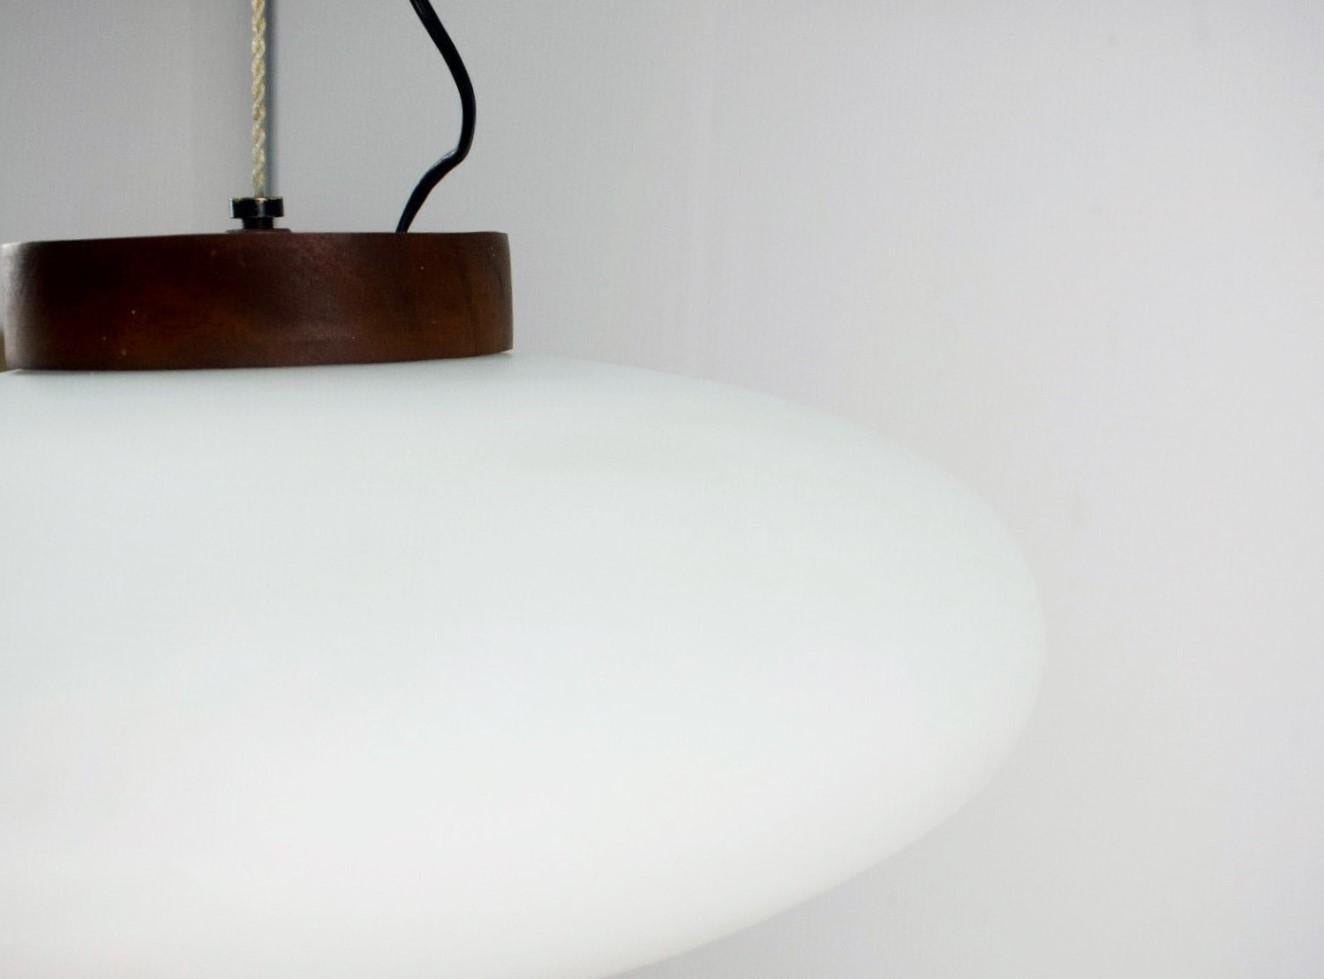 Large Stilnovo Pendant Brushed Satin Glass Diffuser and Wood, Italy, 1950s For Sale 4